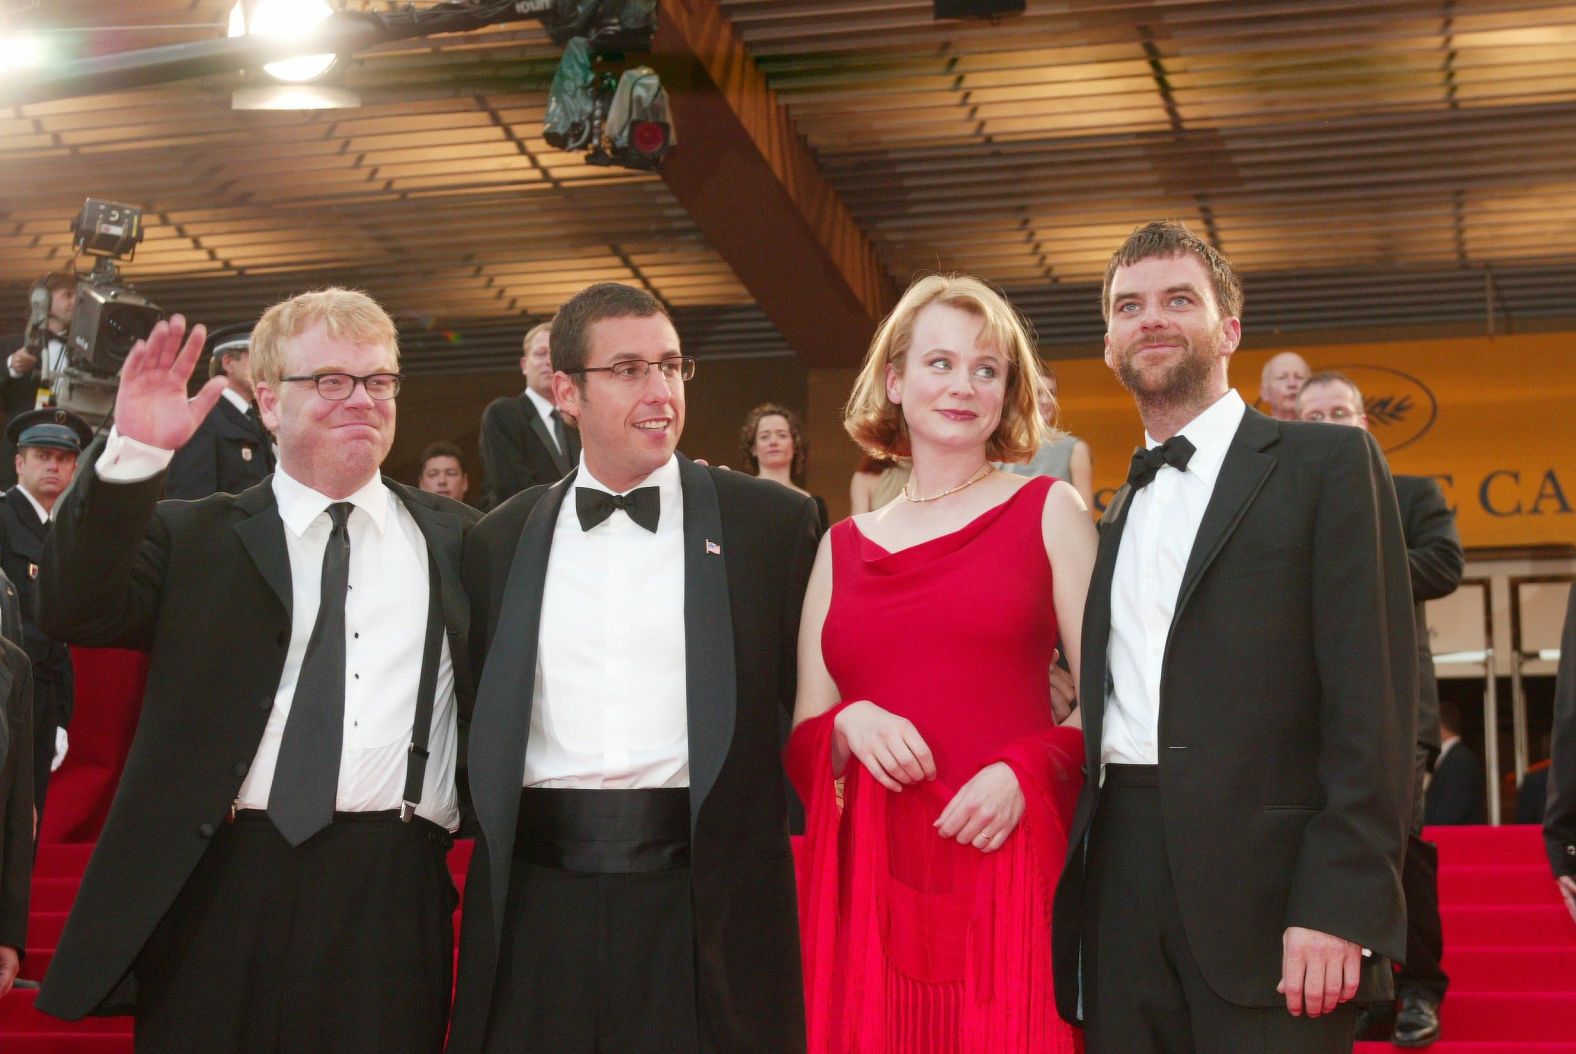 From left, Philip Seymour Hoffman, Sandler, Emily Watson and director Paul Thomas Anderson attend a screening of their dramatic film "Punch-Drunk Love" while attending the Cannes Film Festival in 2002. The movie marked a change in Sandler's career path and showed he could do more than just comedy.